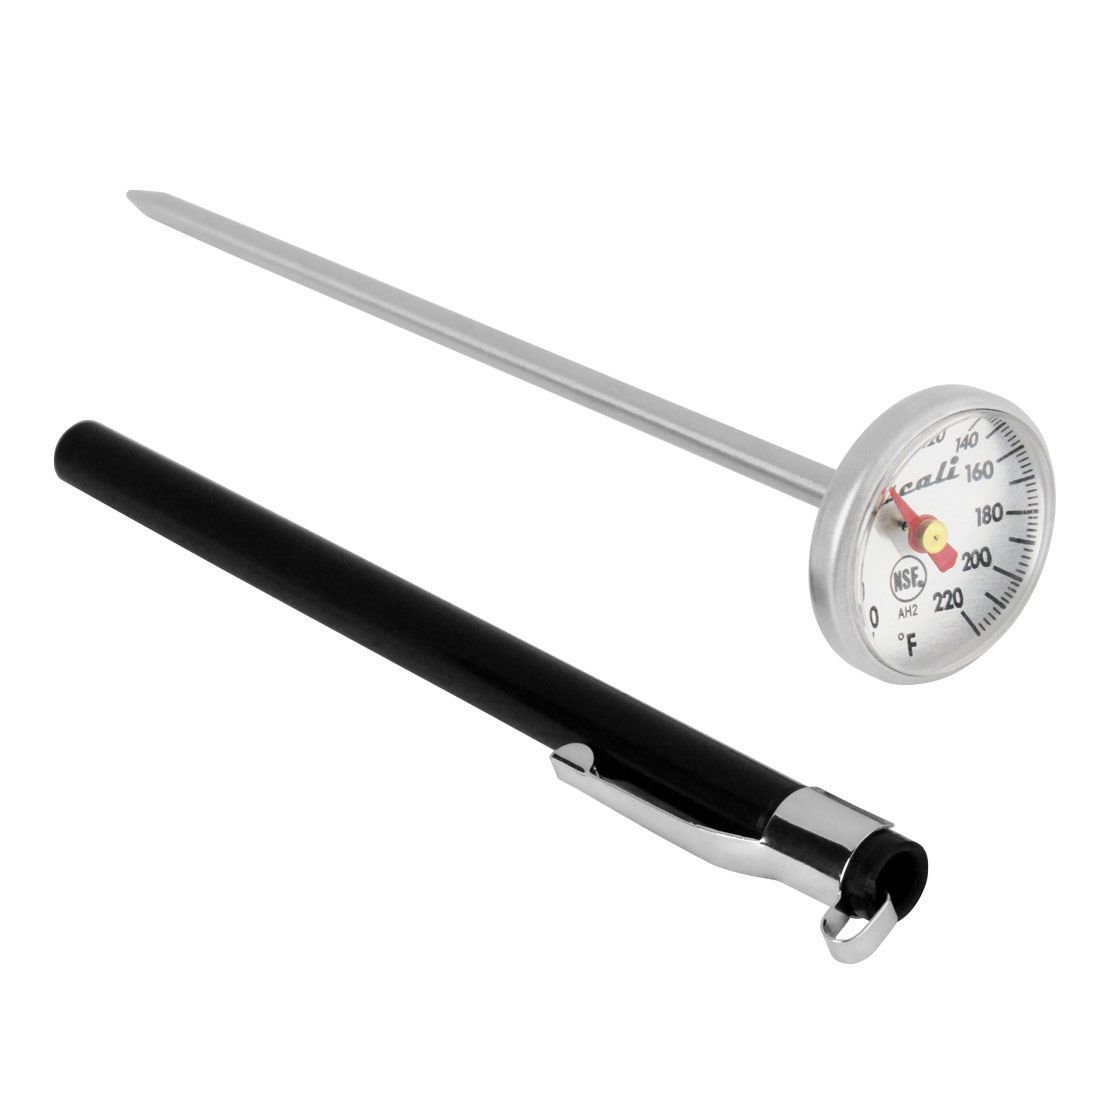 Norpro Instant Read Thermometer